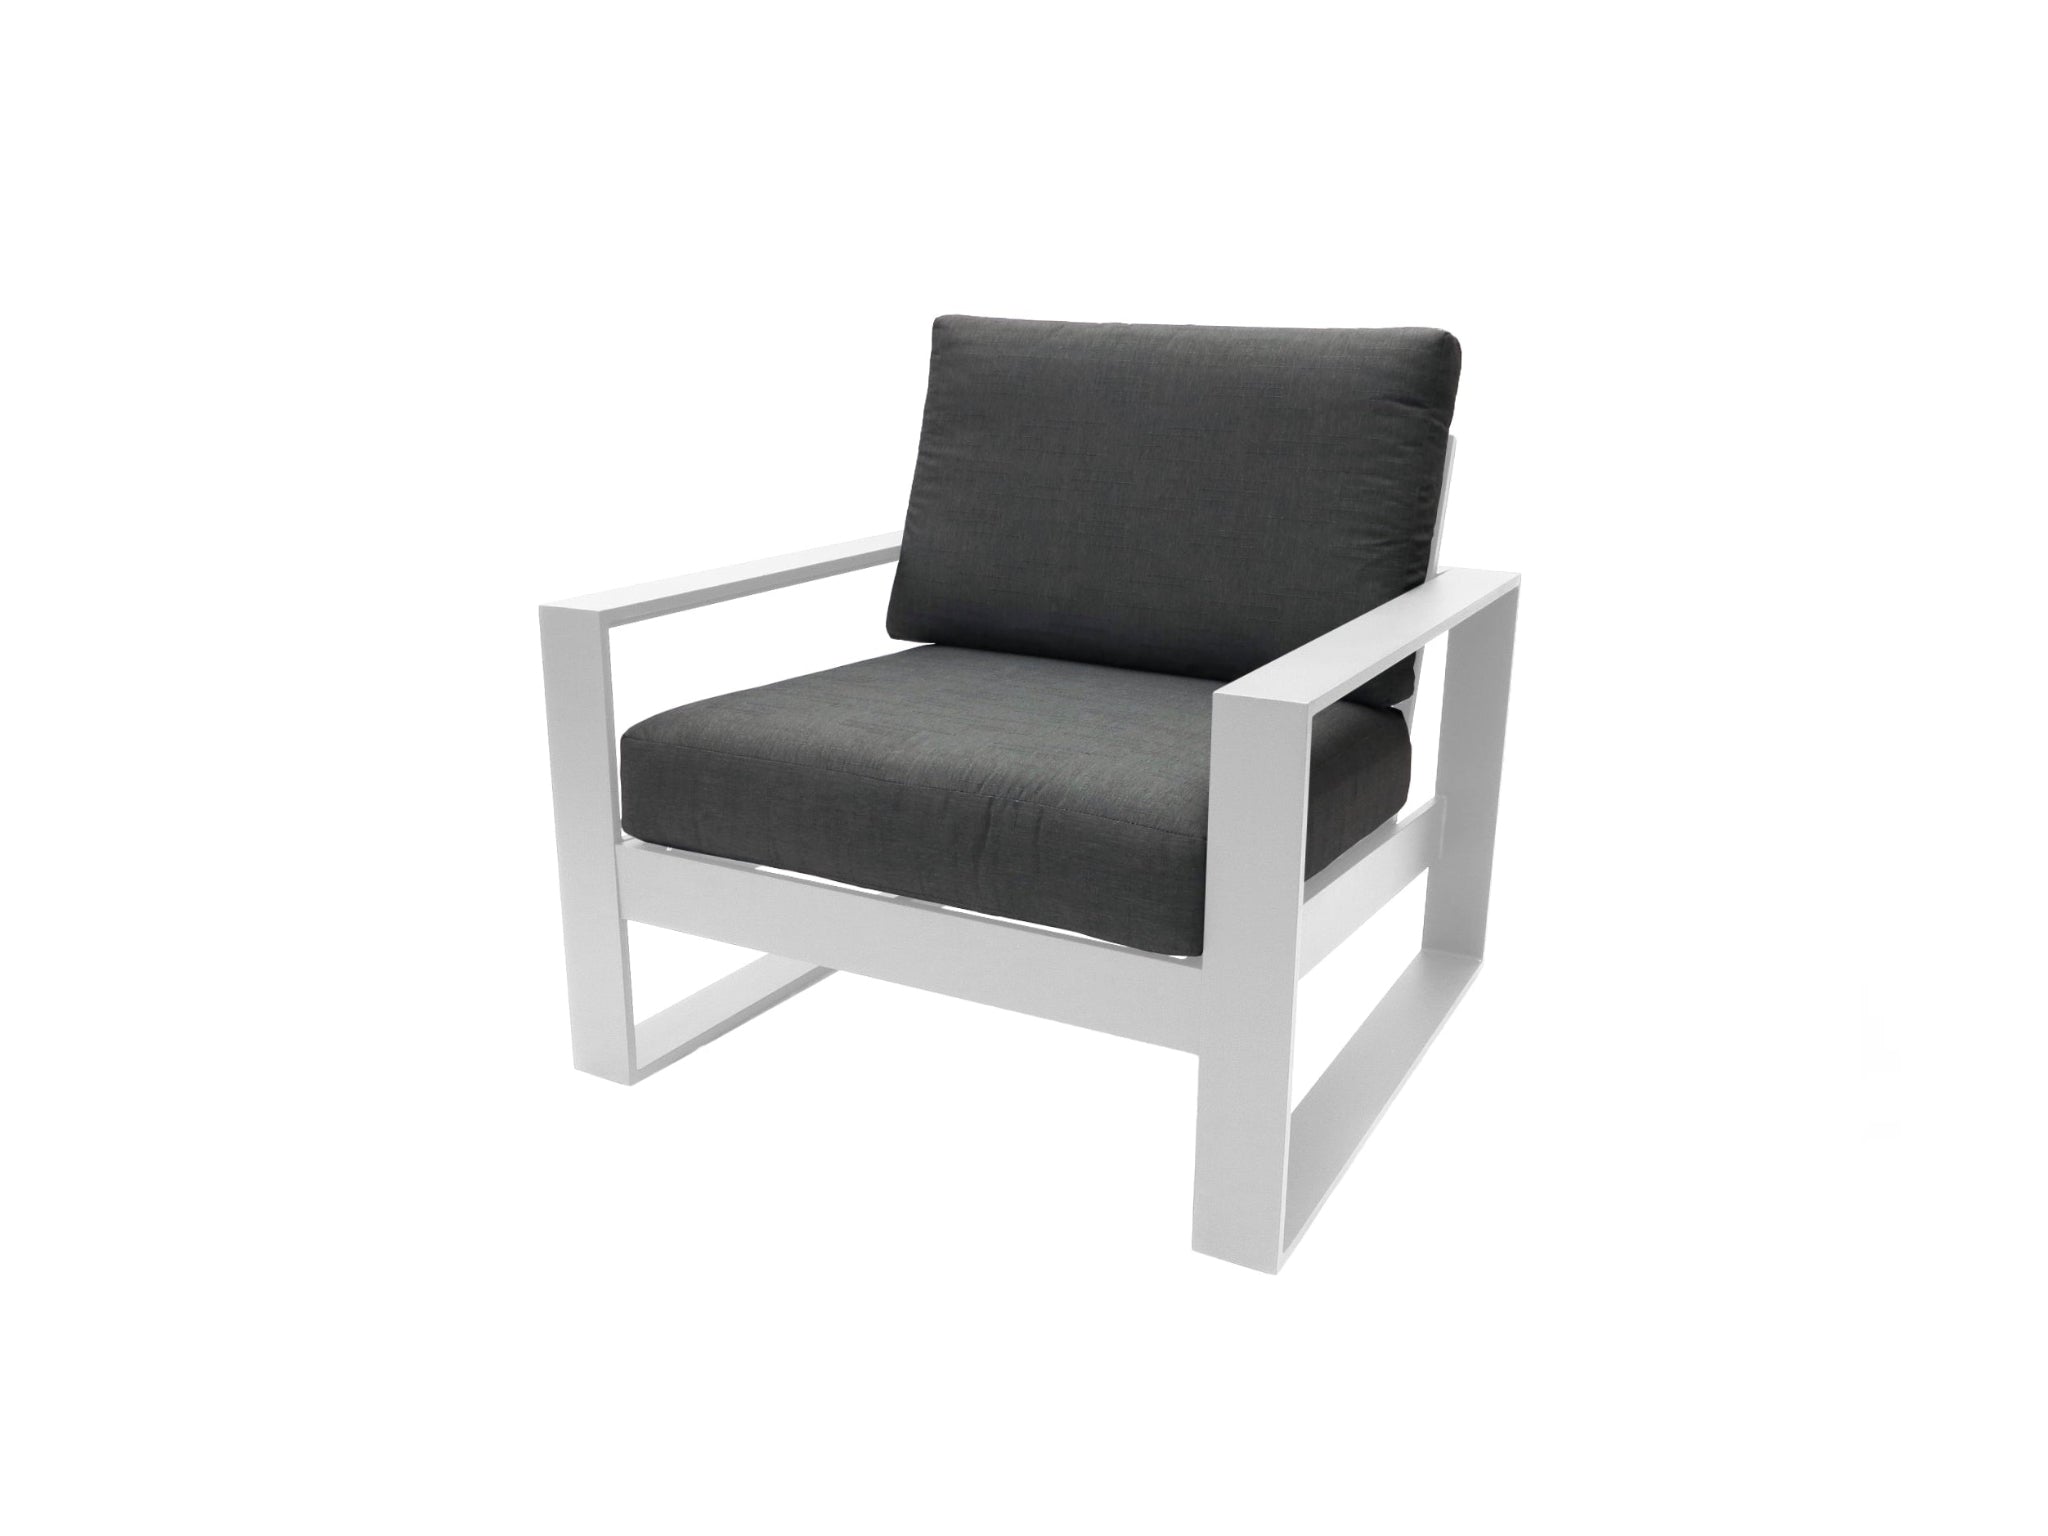 Sunlongarden Manly Lounge Chair